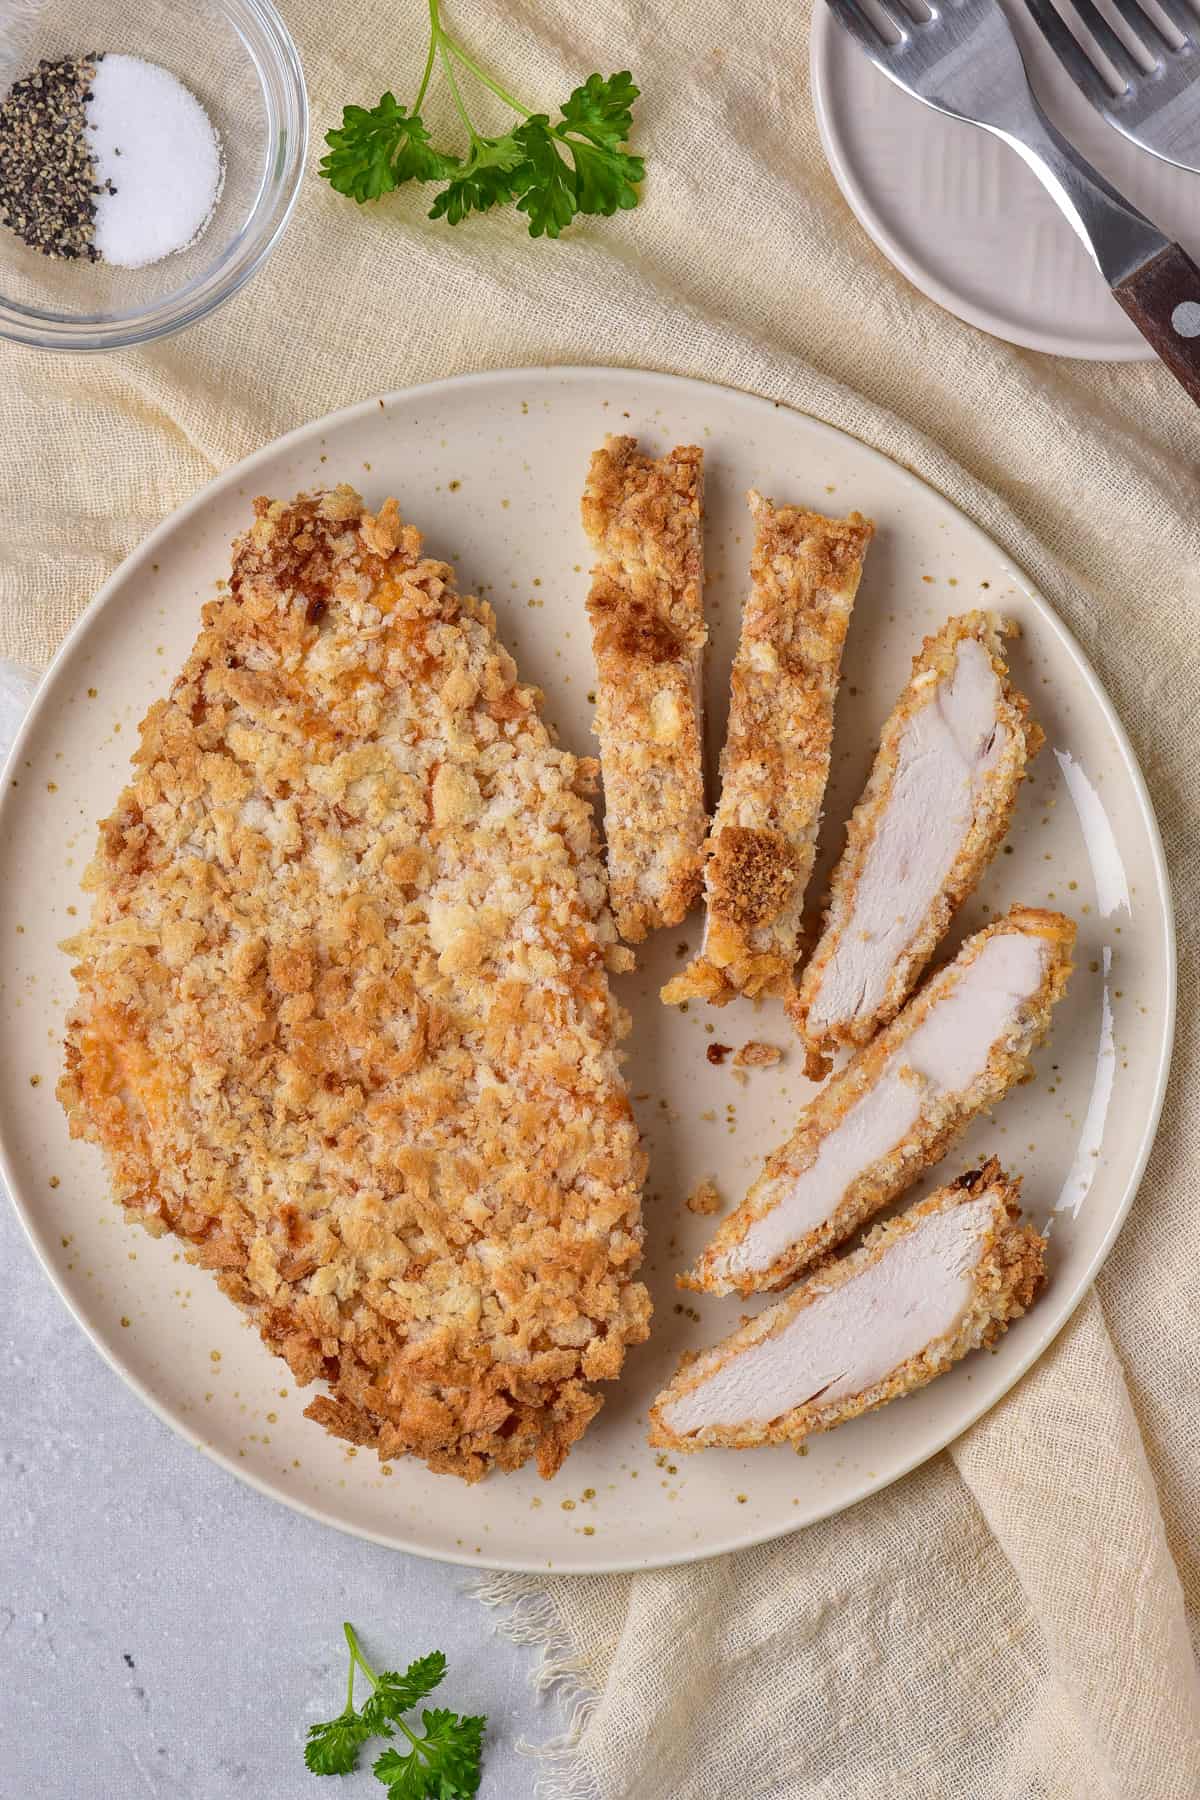 Looking down at a plate with a chicken cutlet sliced.